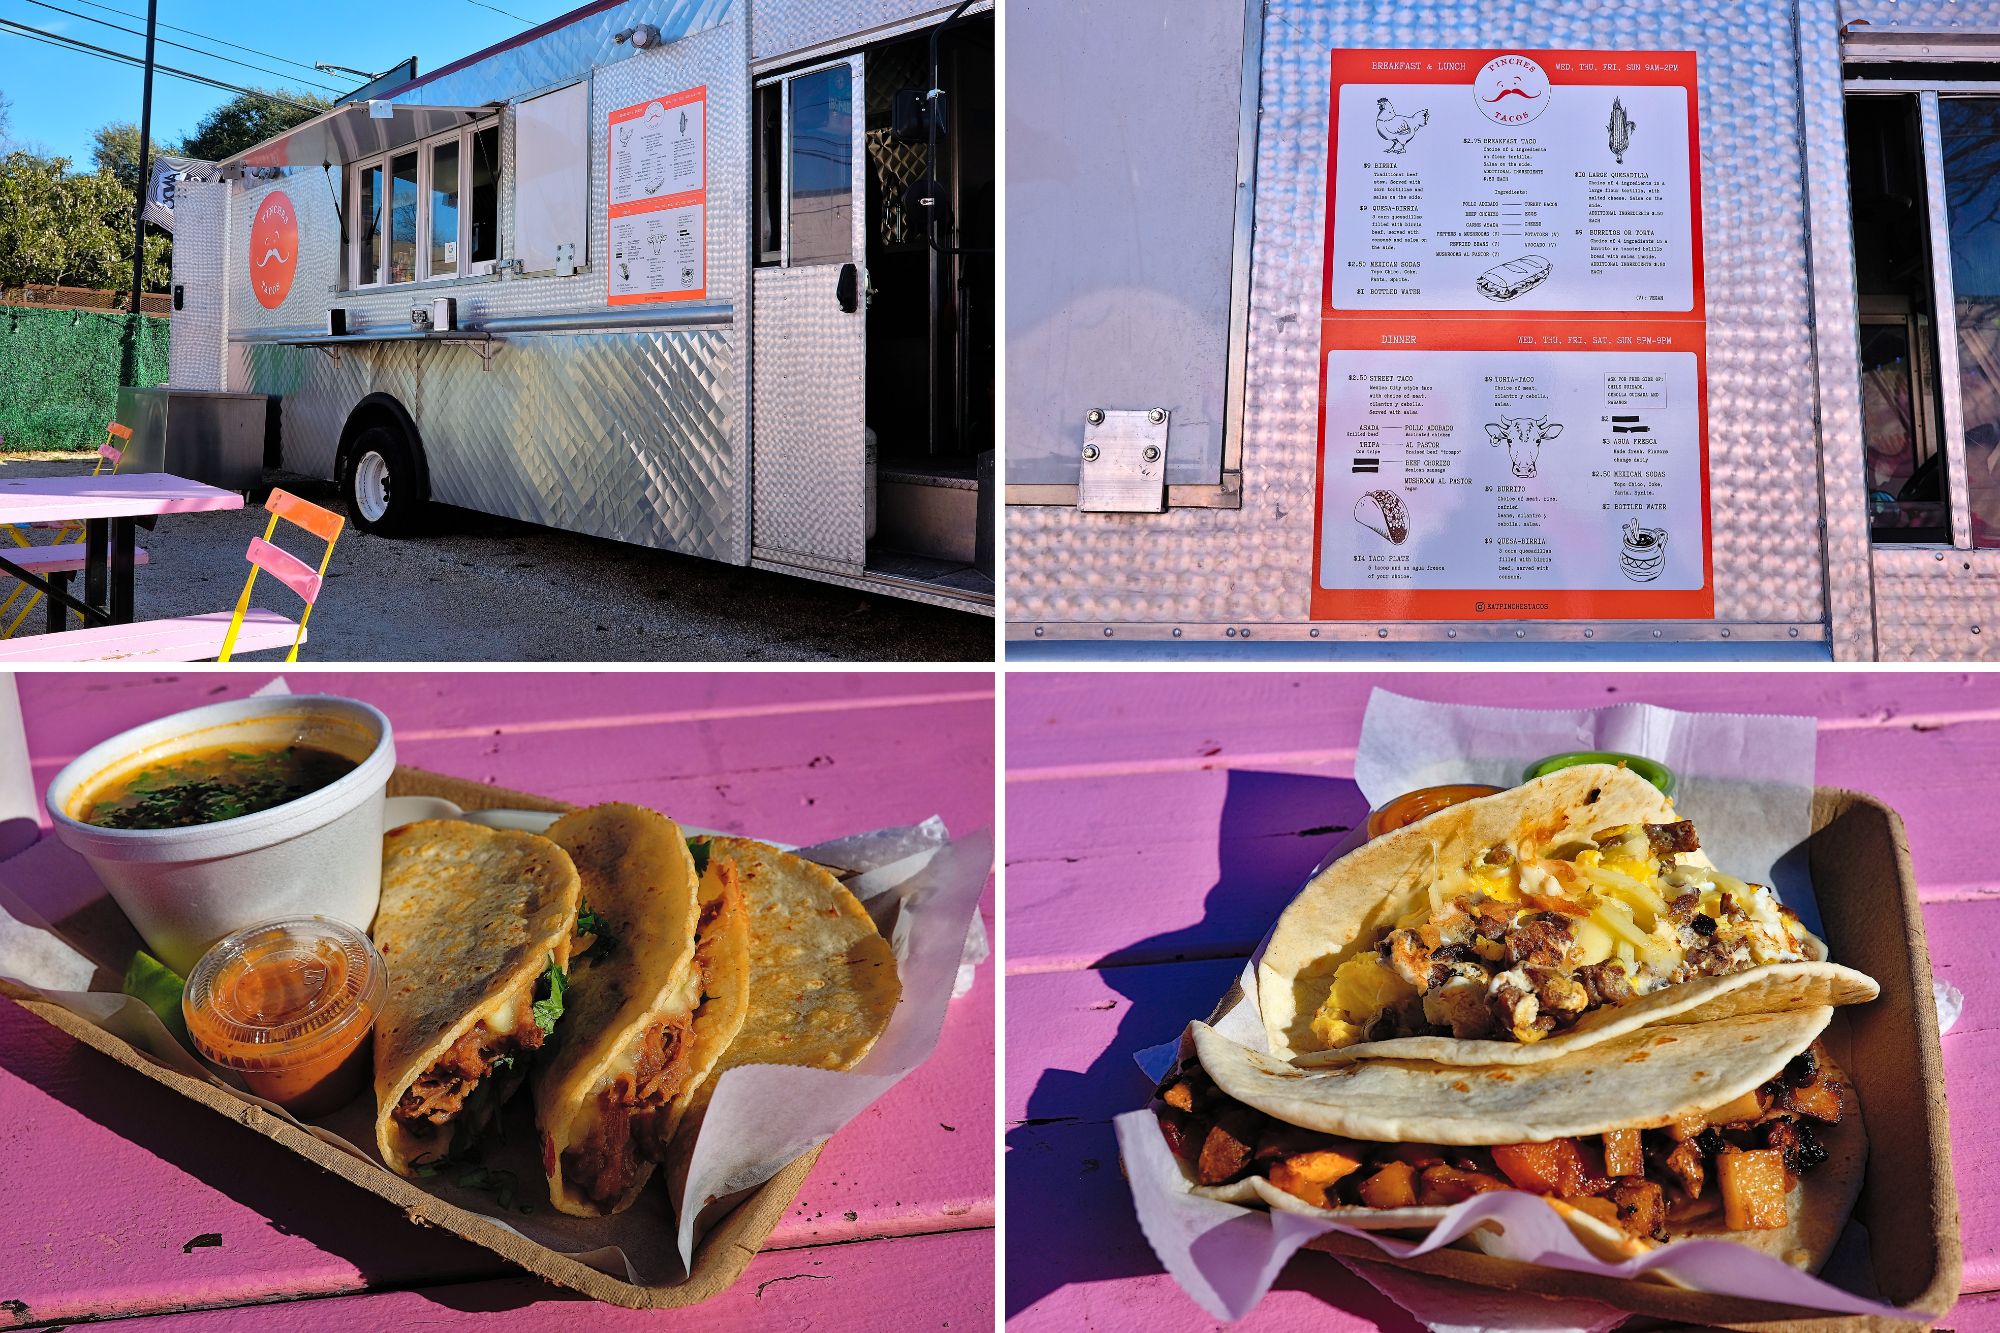 Collage of images from Pinches Tacos food truck